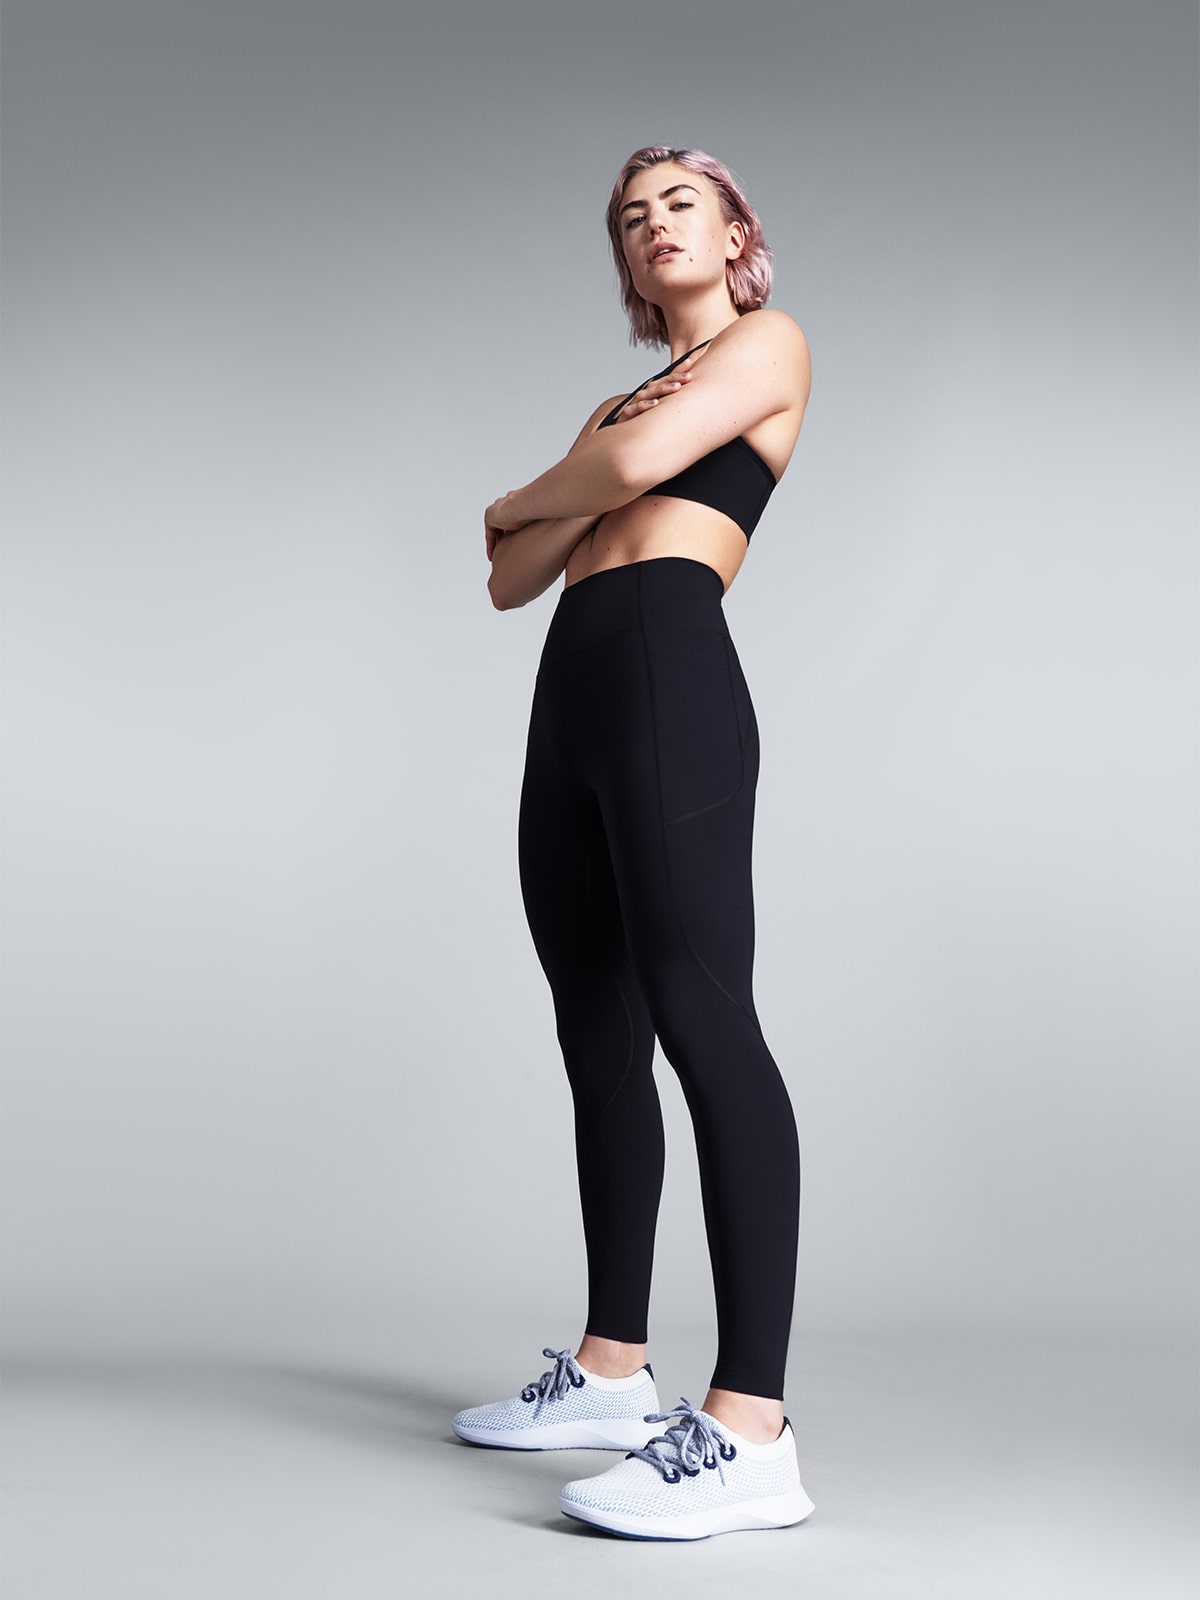 Squat Proof Leggings Part 1: The Search is On! — Laurel & Iron